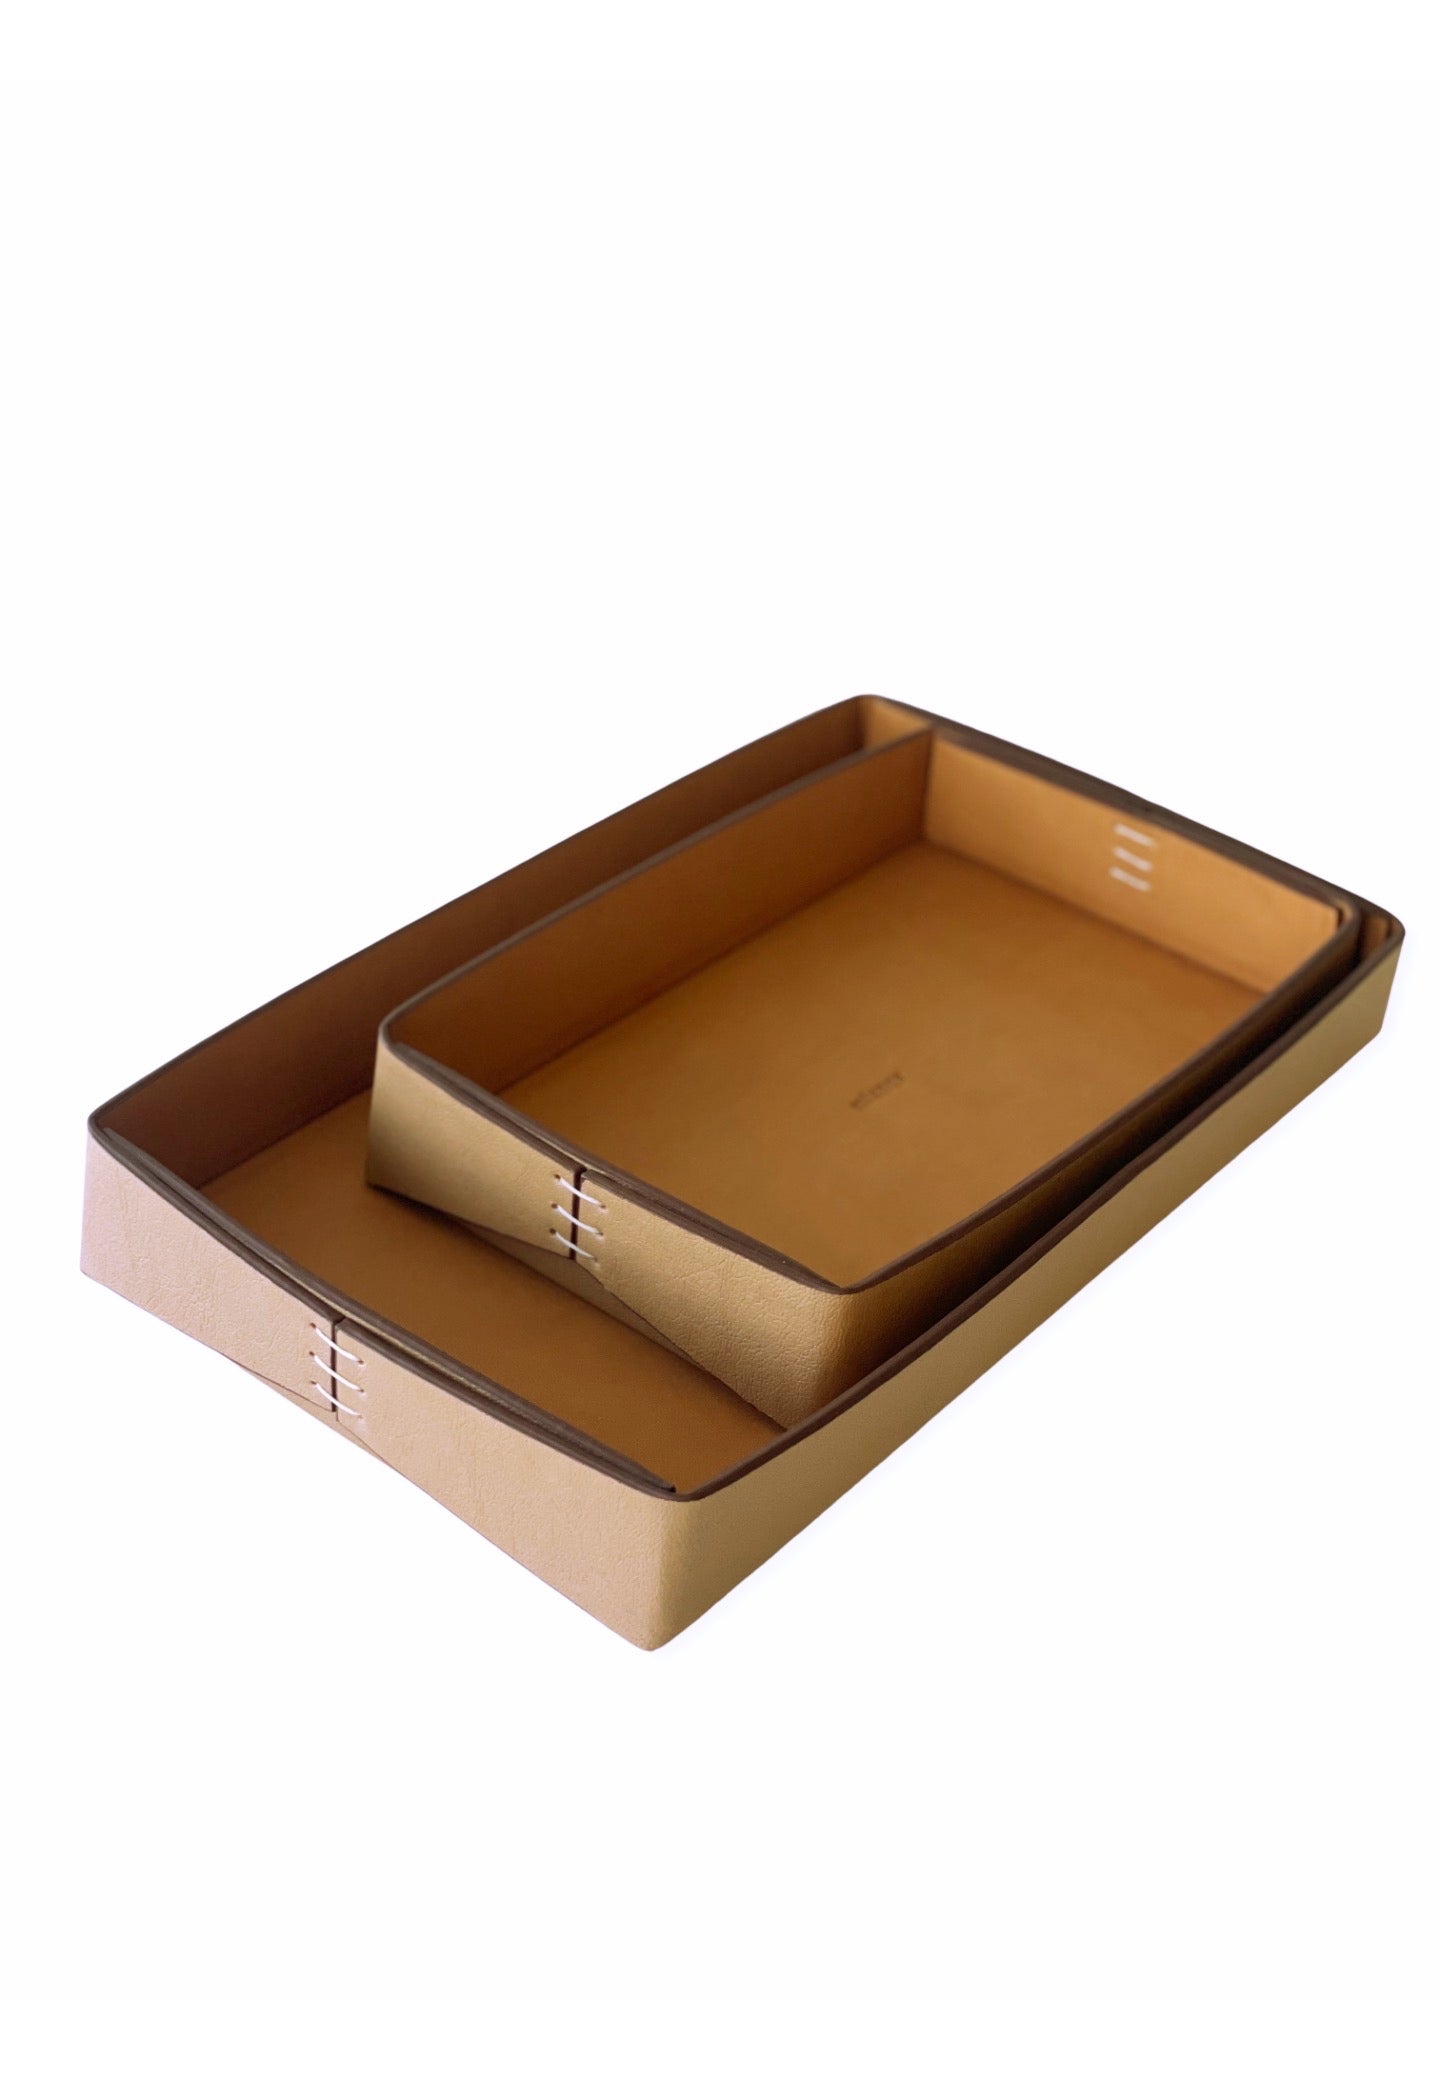 Vegan Apple Leather Tray Camel Small